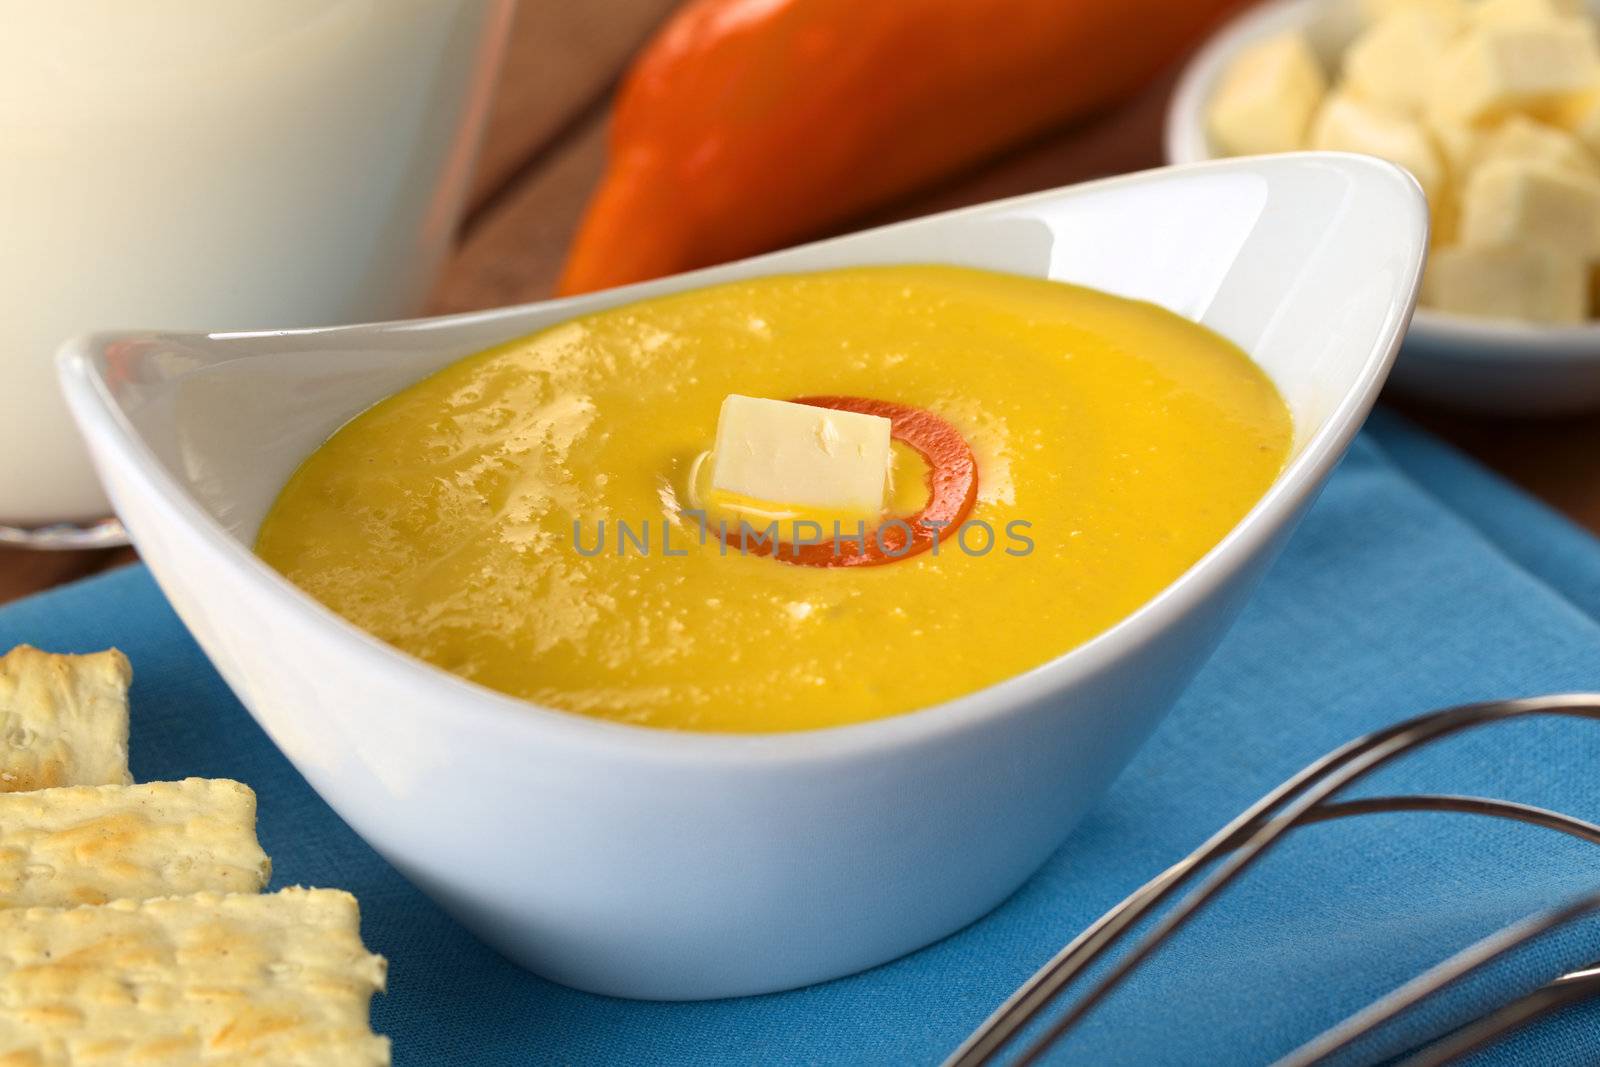 Peruvian Huancaina Sauce (spicy cheese sauce) in ceramic bowl surrounded by its ingredients: cheese, soda crackers, aji (Peruvian yellow chili pepper) and milk (Selective Focus, Focus on the front of the cheese on the sauce) 